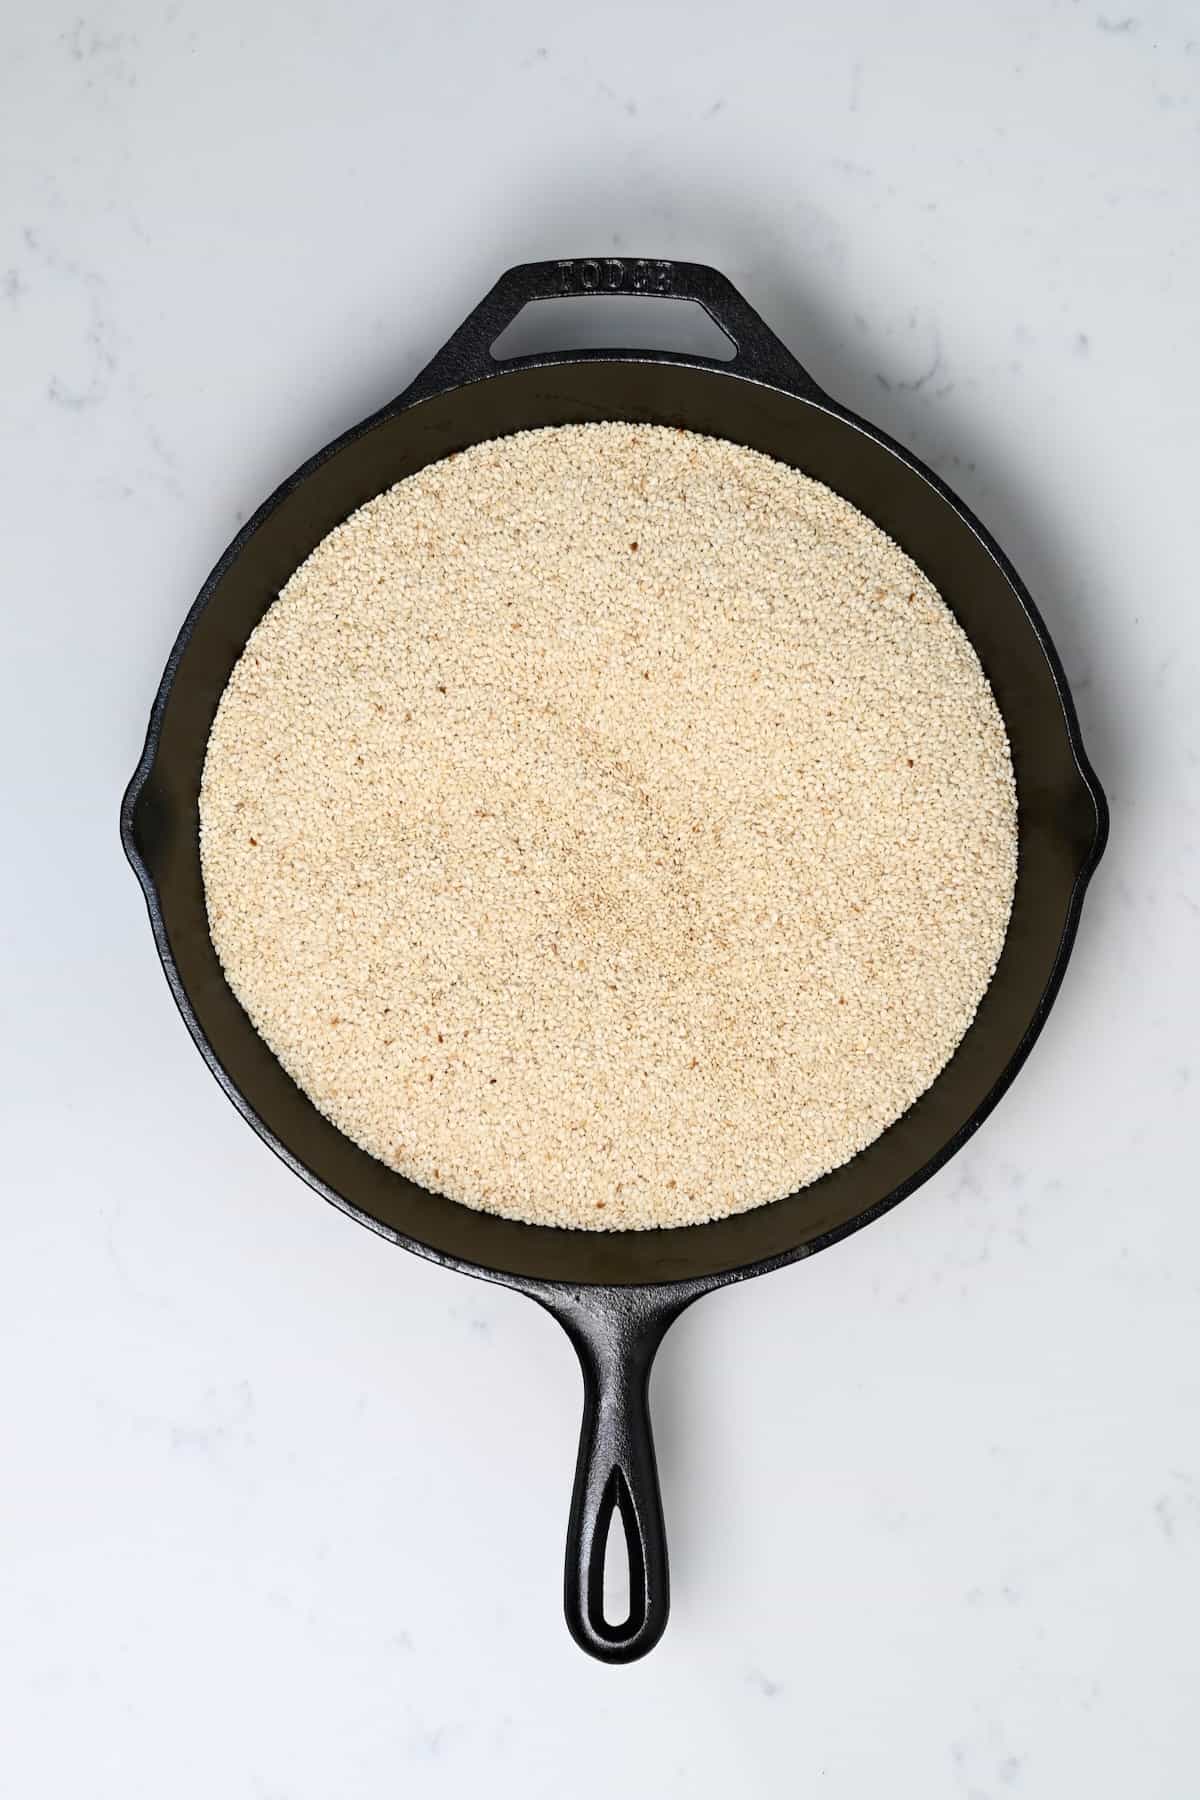 Toasted sesame seeds in a pan